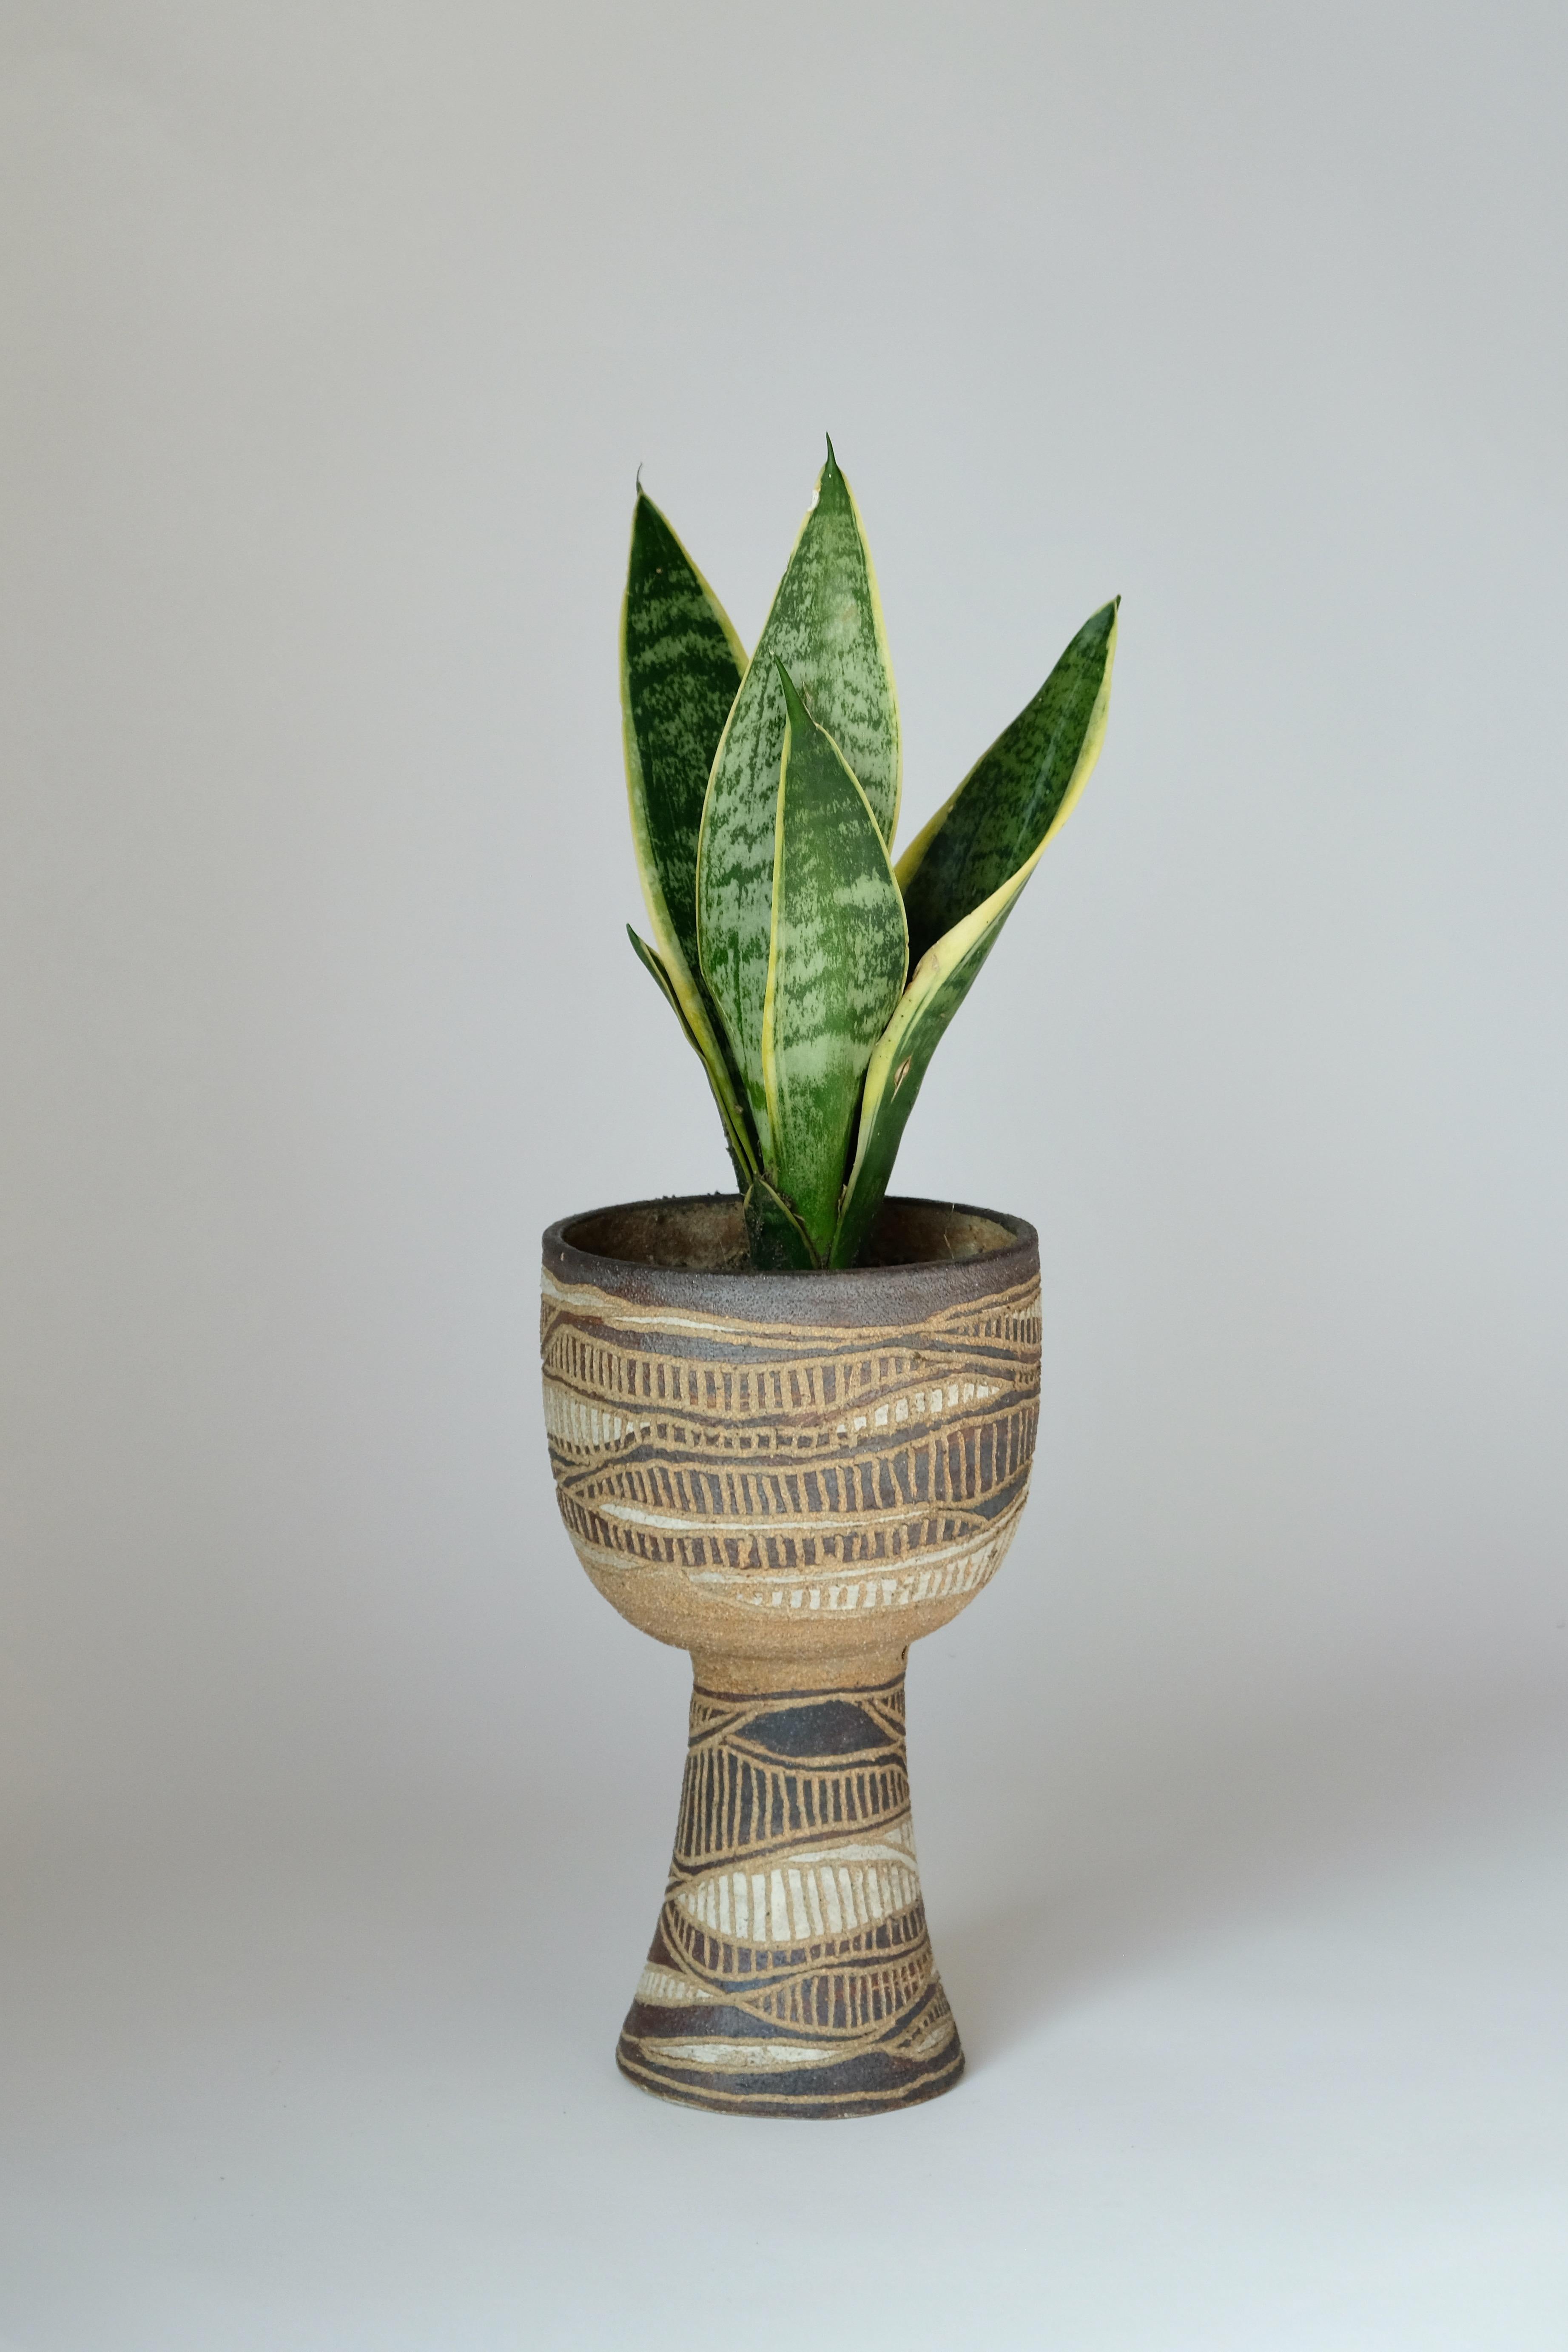 Vintage stoneware planter in chalice form with incised design features. Has a drainage hole. Very good vintage condition with only minor fleabites to the ceramic. Includes plant if picked up in Los Angeles.